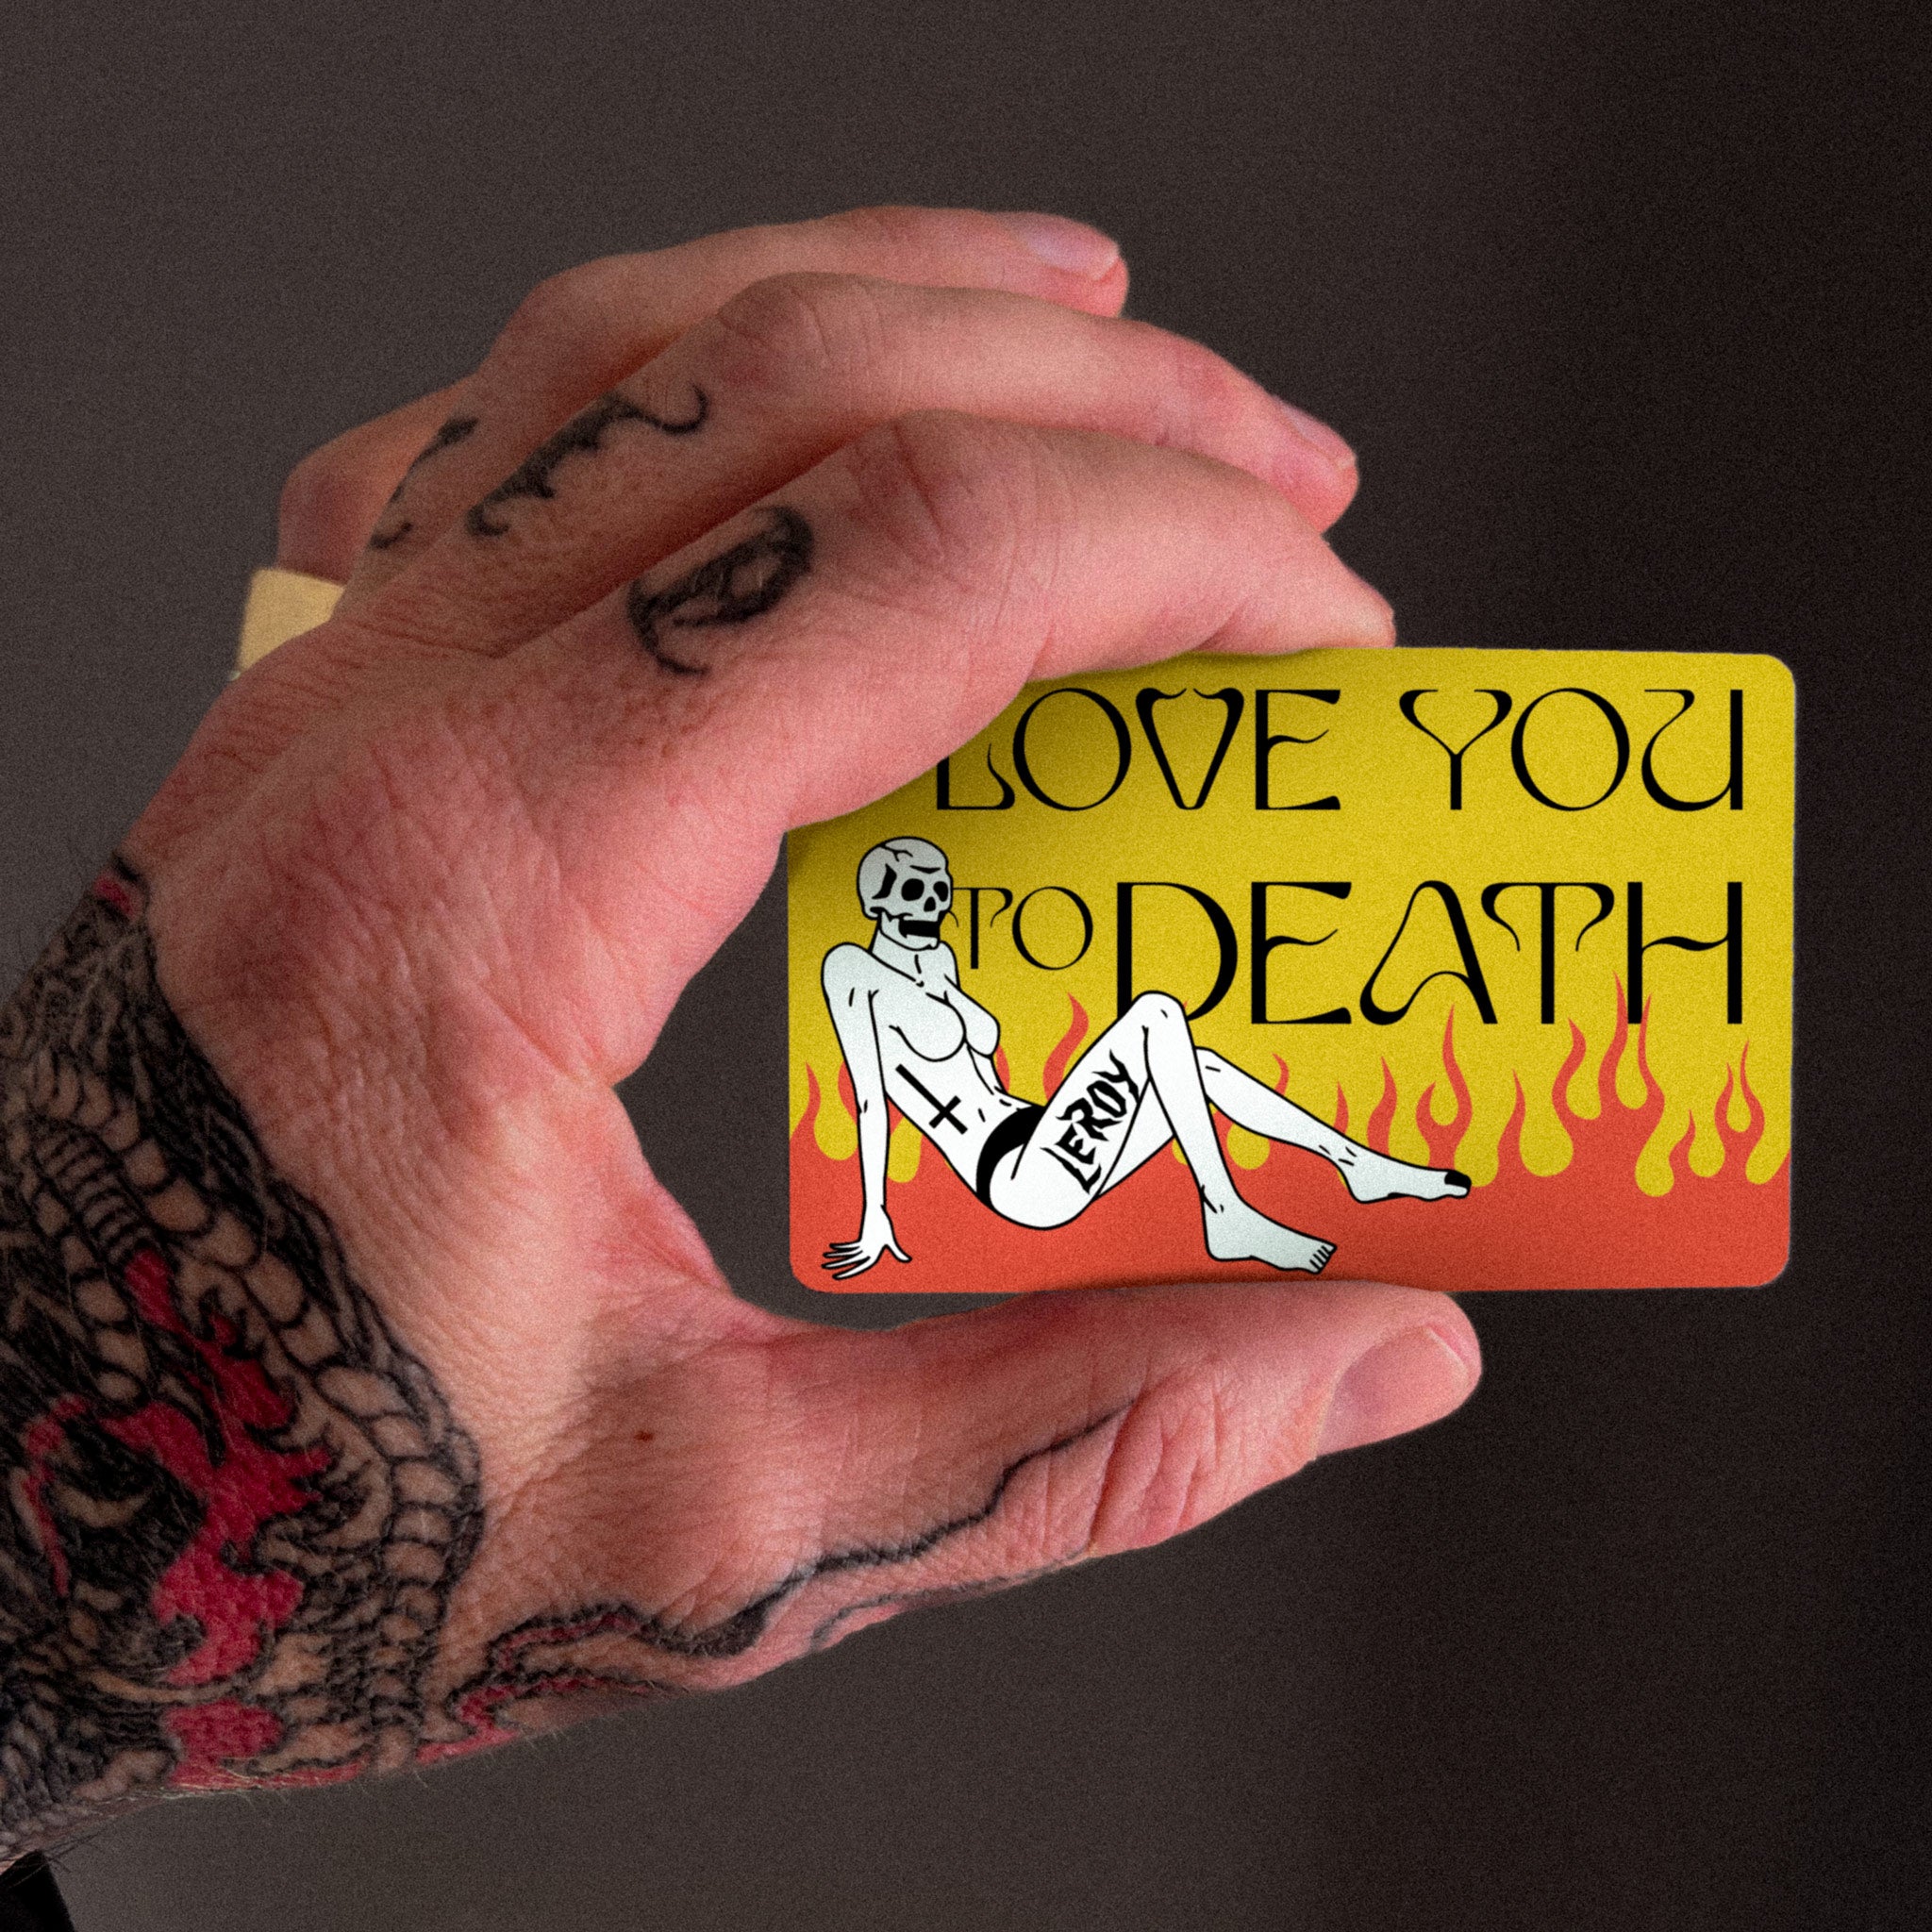 tattooed hand holding gift card that reads, "LOVE YOU TO DEATH"